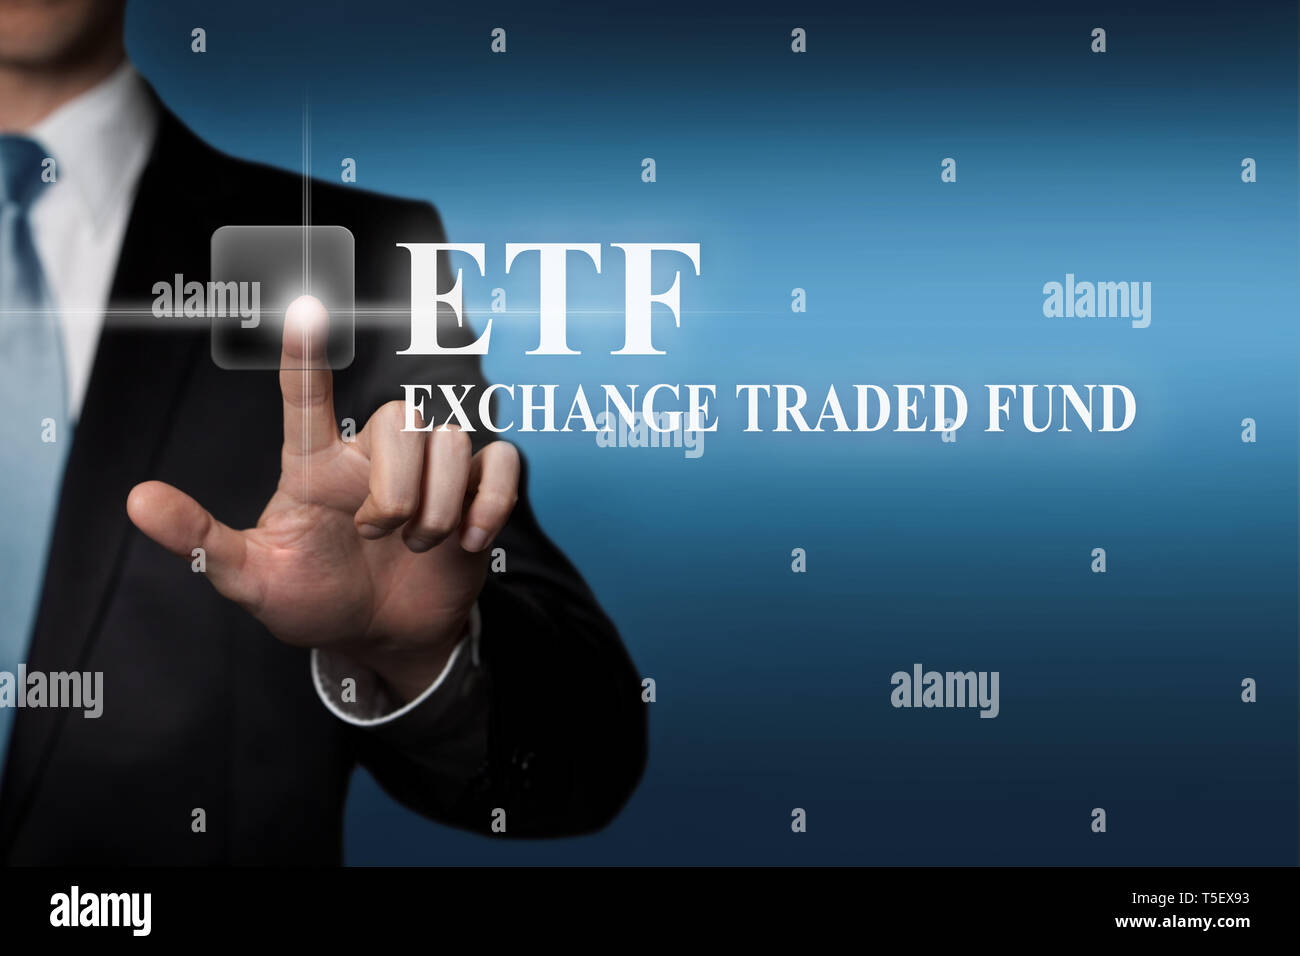 business finance concept - businessman presses virtual touchscreen button - ETF Exchange Traded Fund Stock Photo